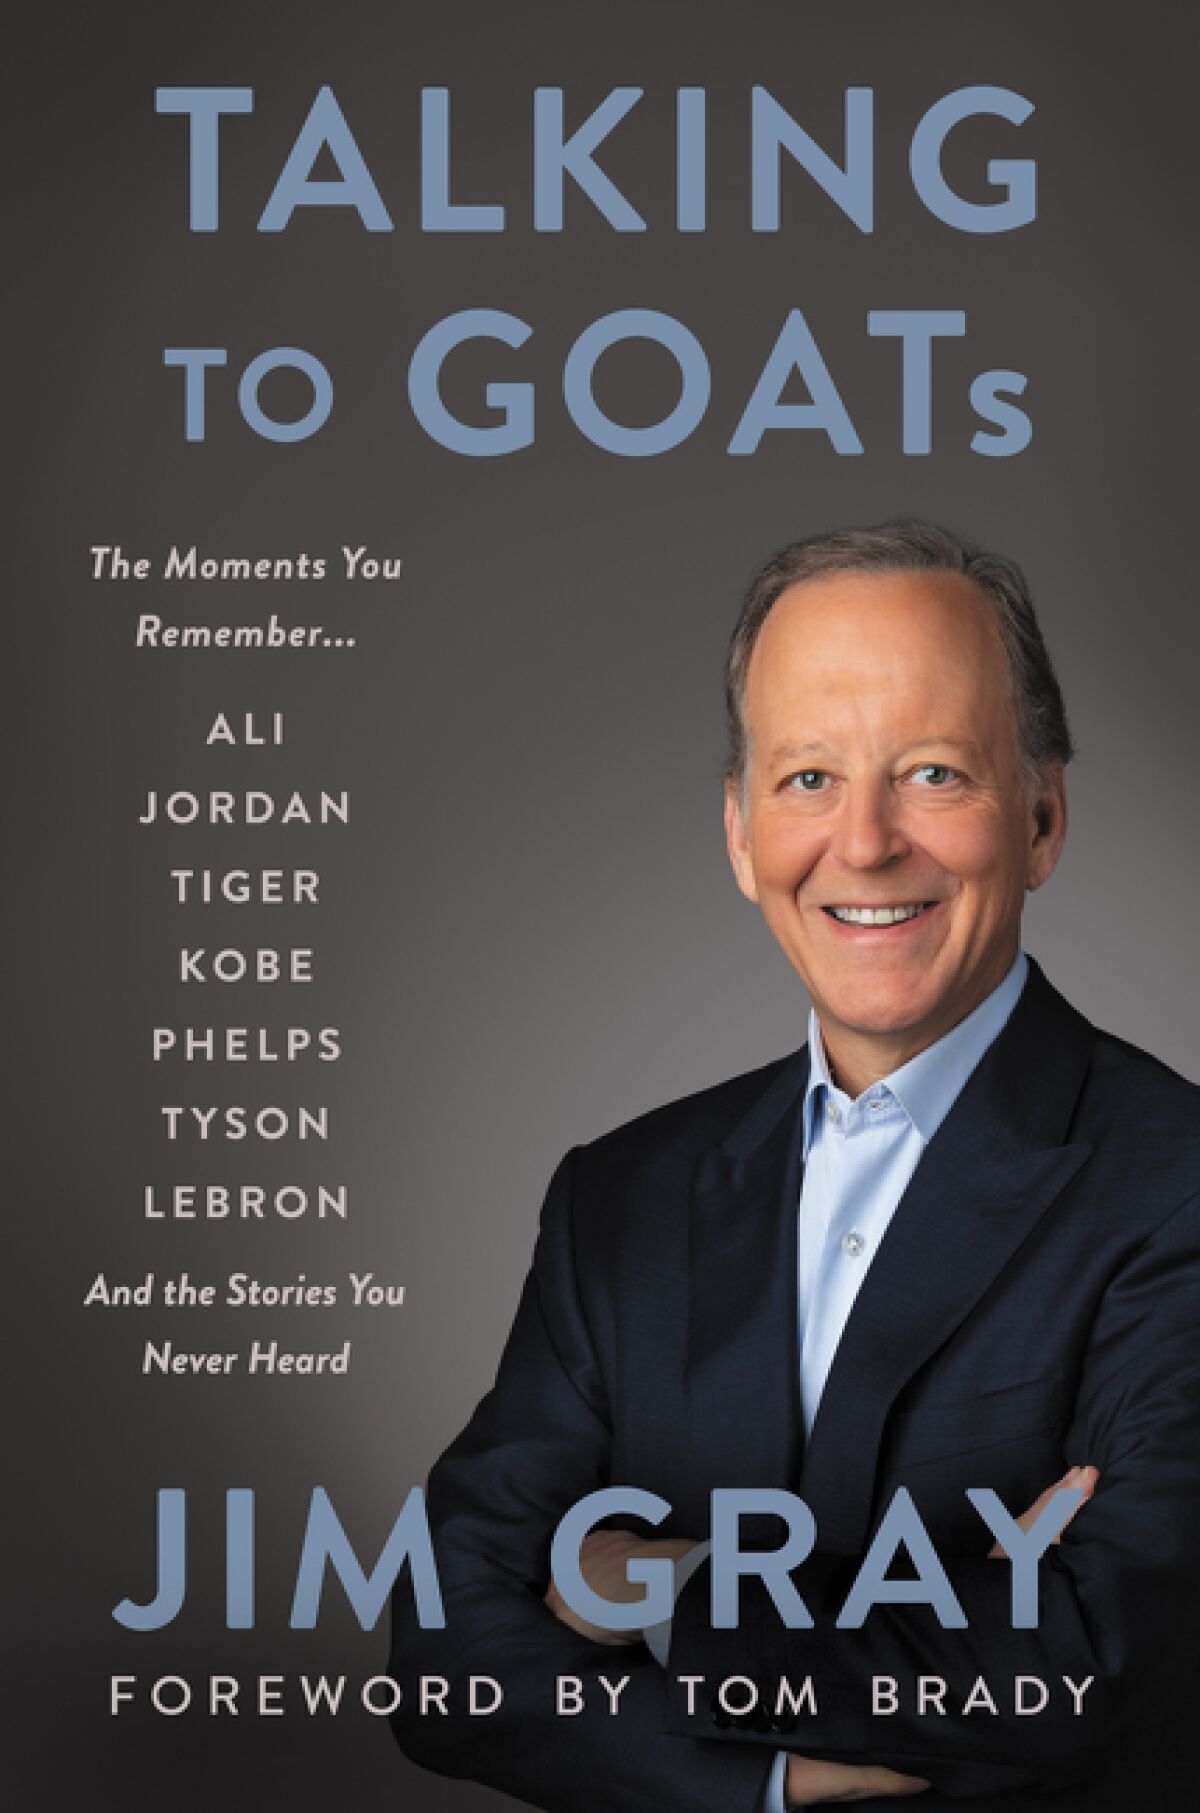 The cover of Talking to GOATs: The Moments You Remember and the Stories You Never Heard by Jim Gray.